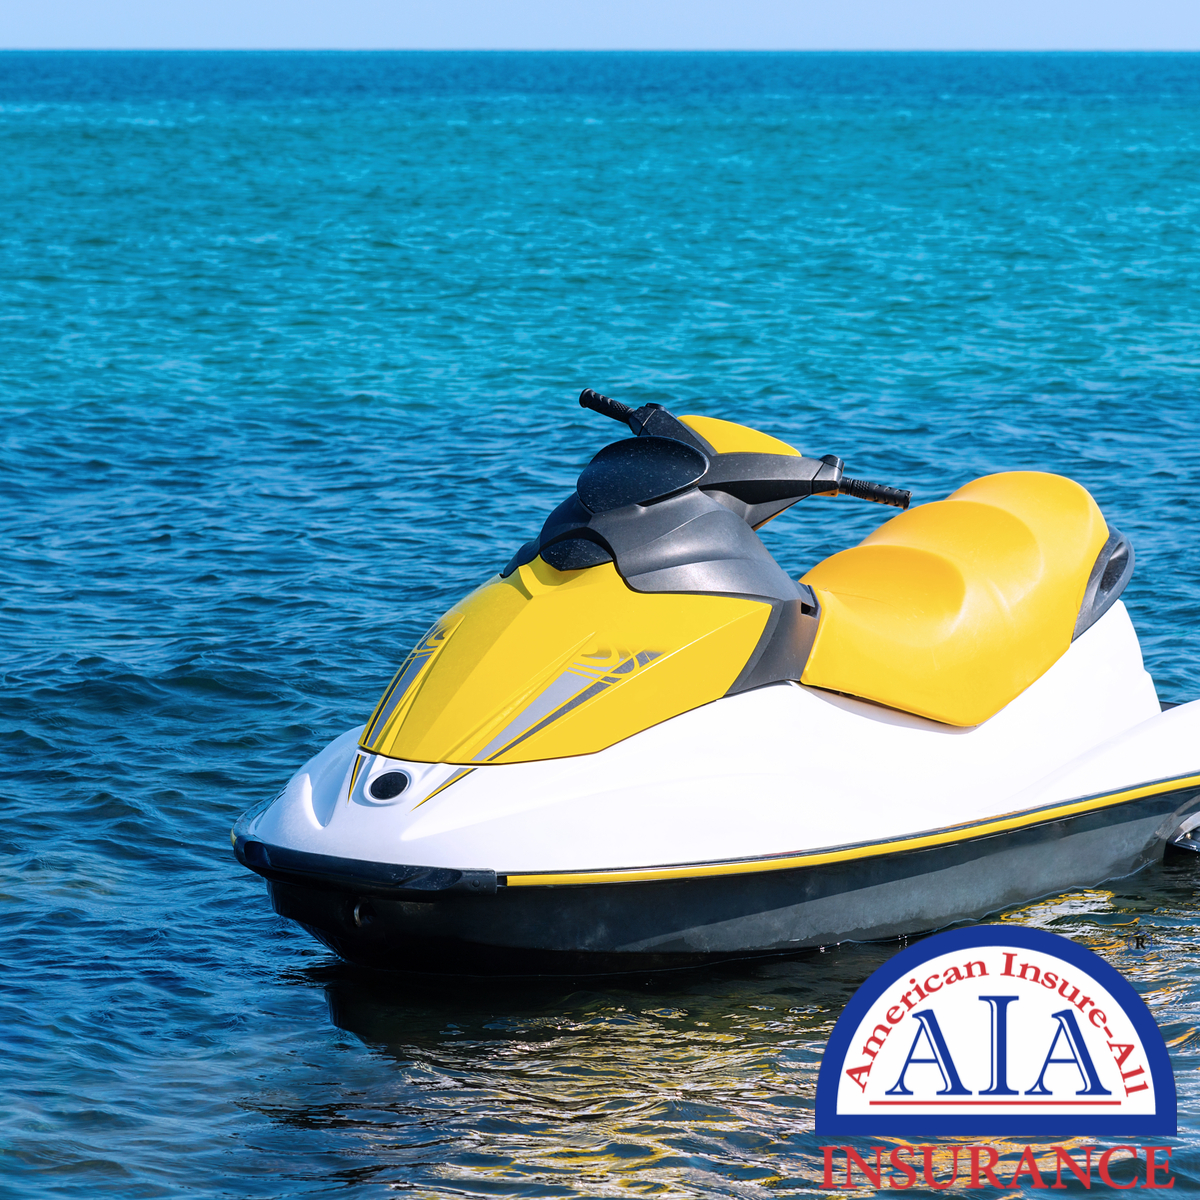 Invest in Jet Ski Insurance with Confidence for Your Summer Adventures!